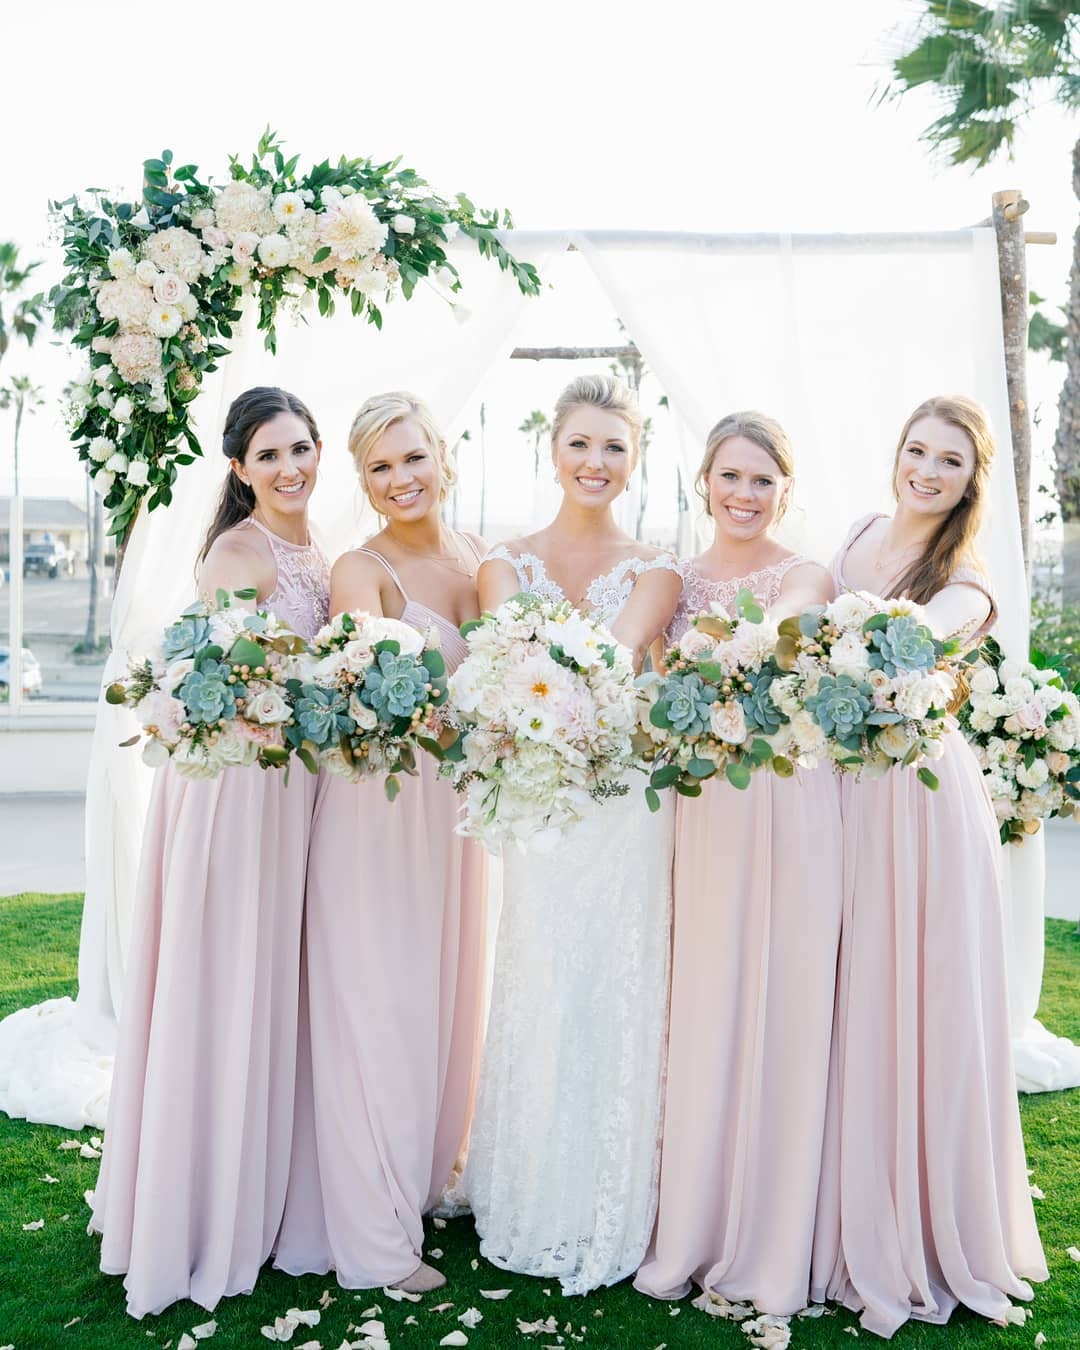 40 Floral Print Bridesmaid Dresses That Made Us Do A Double Take ⋆ Ruffled